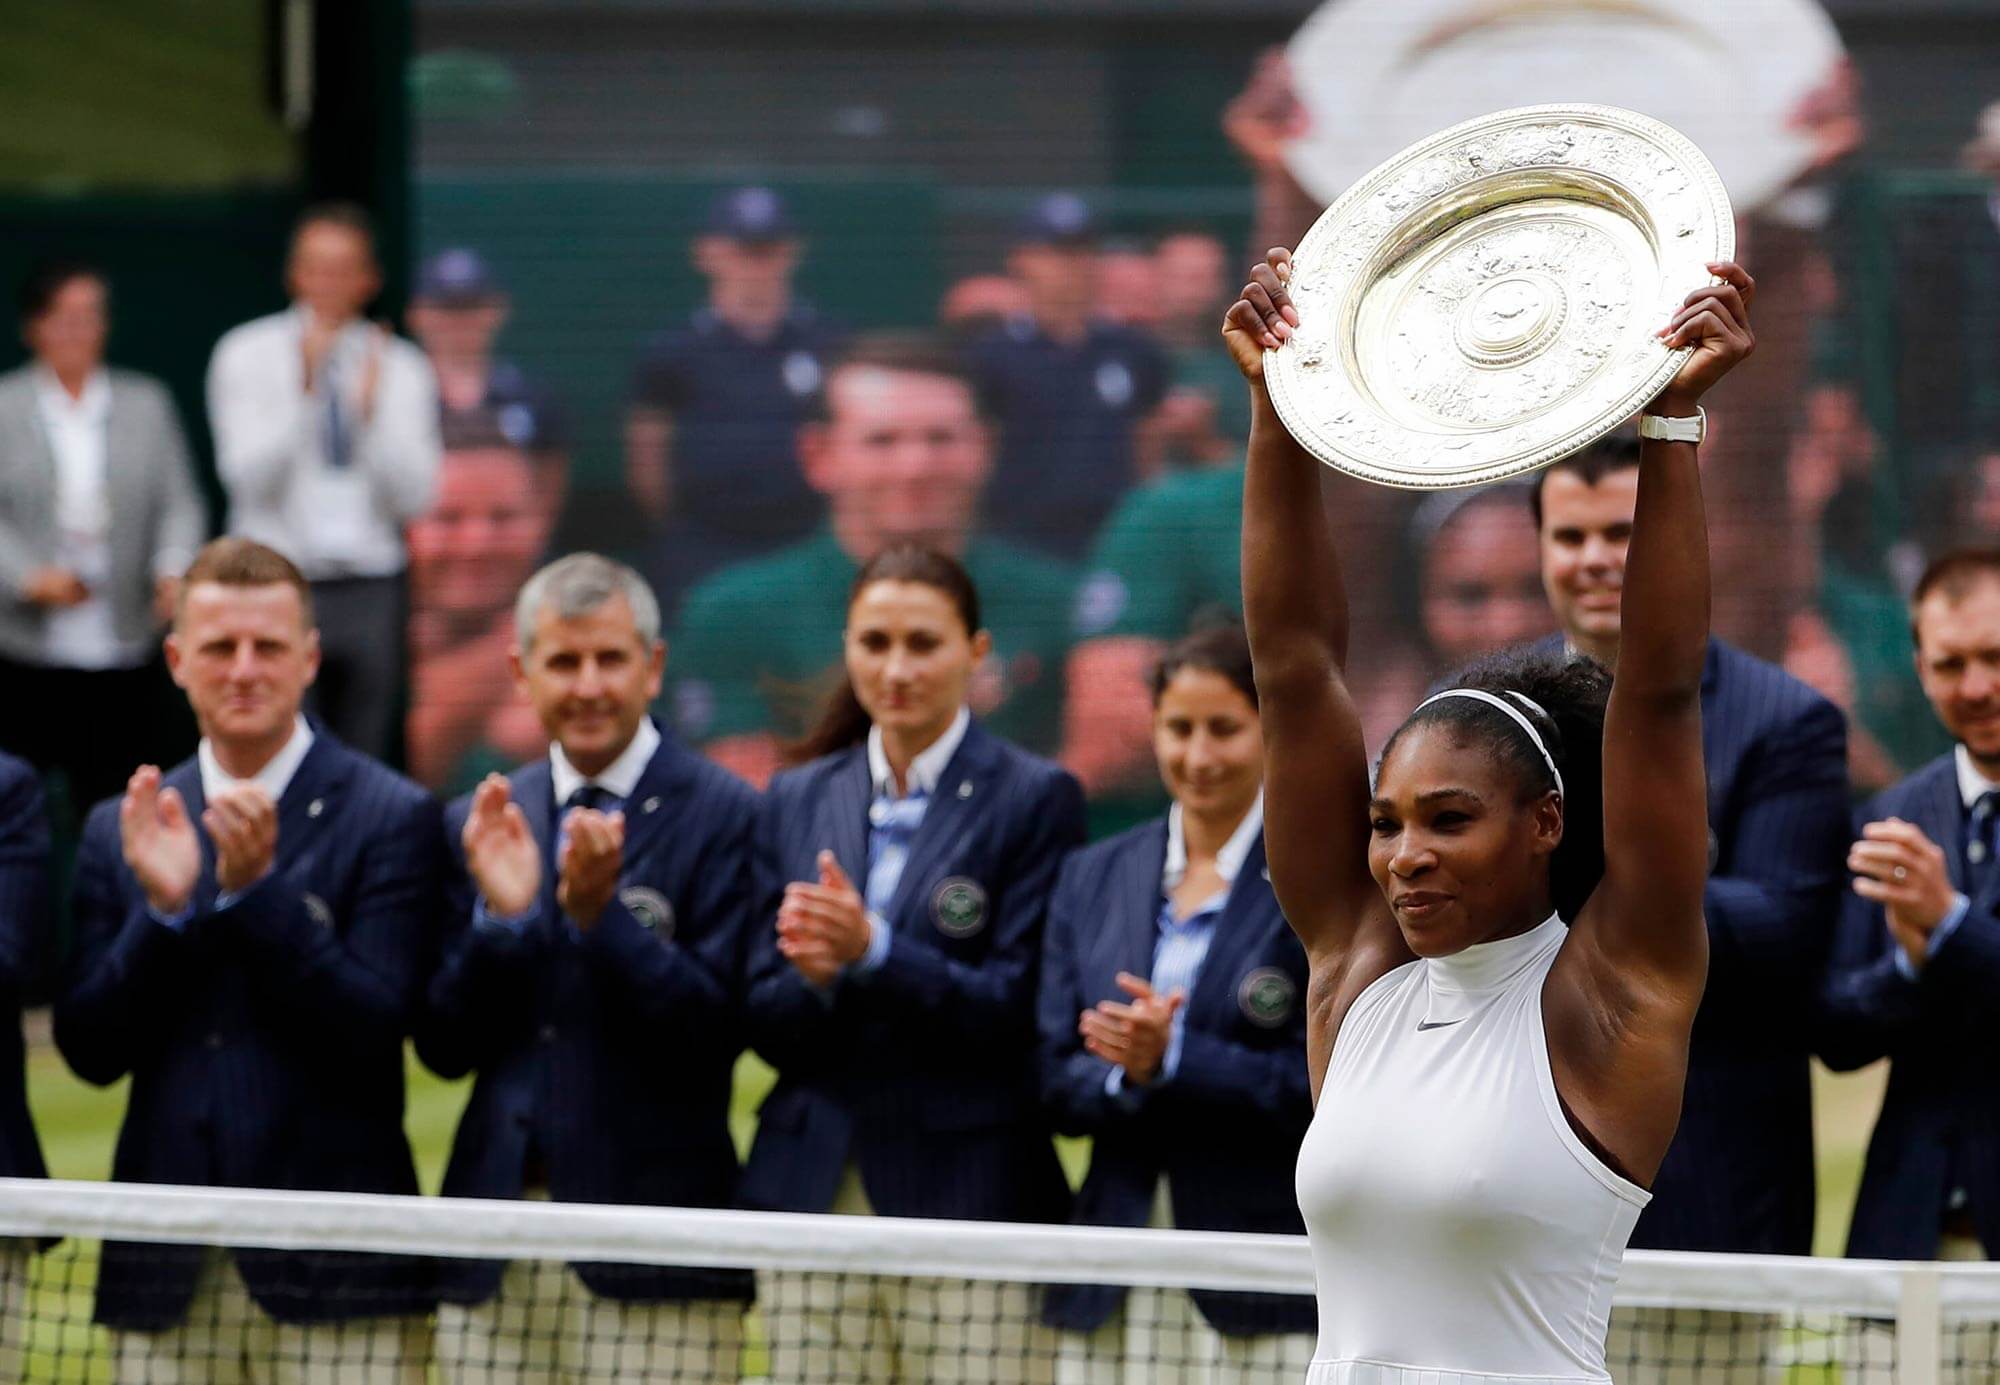 Image of Serena Williams after Wimbledon win with trophy